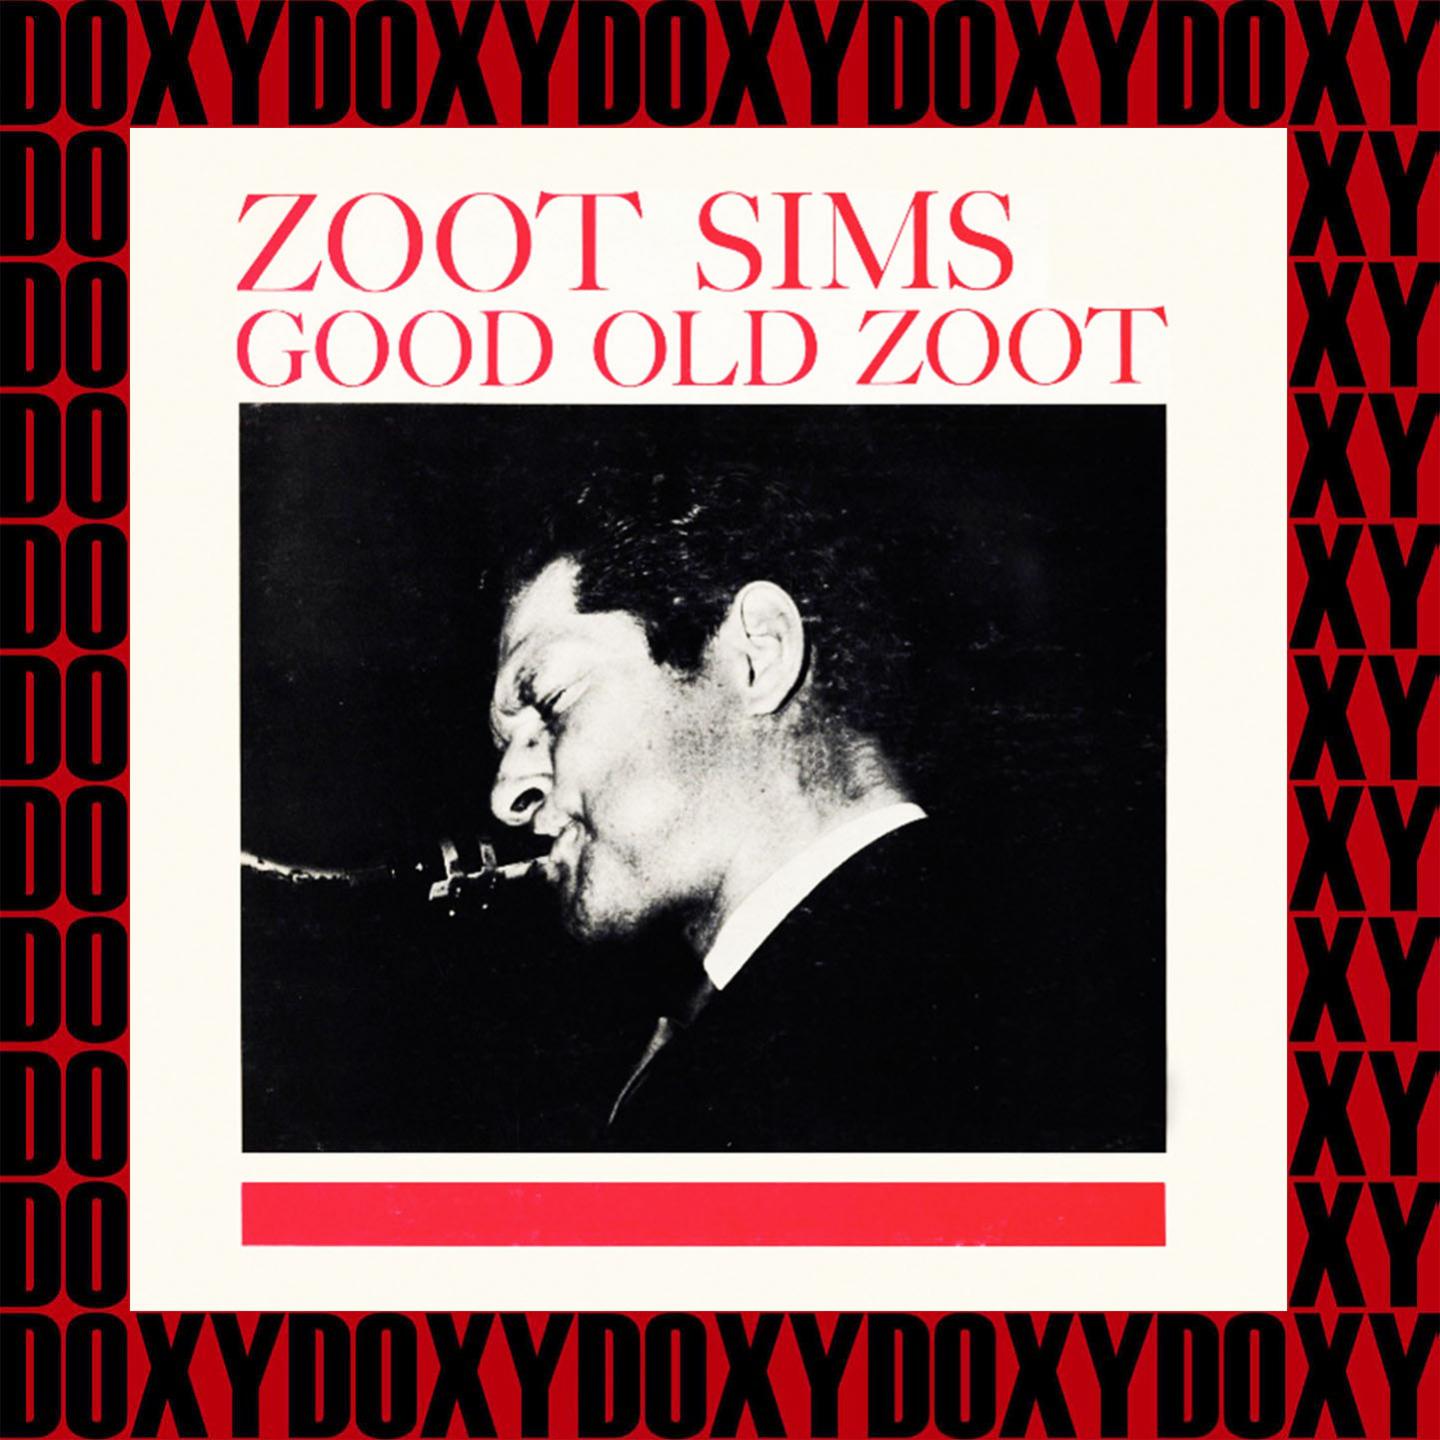 Good Old Zoot (Remastered Version) (Doxy Collection)